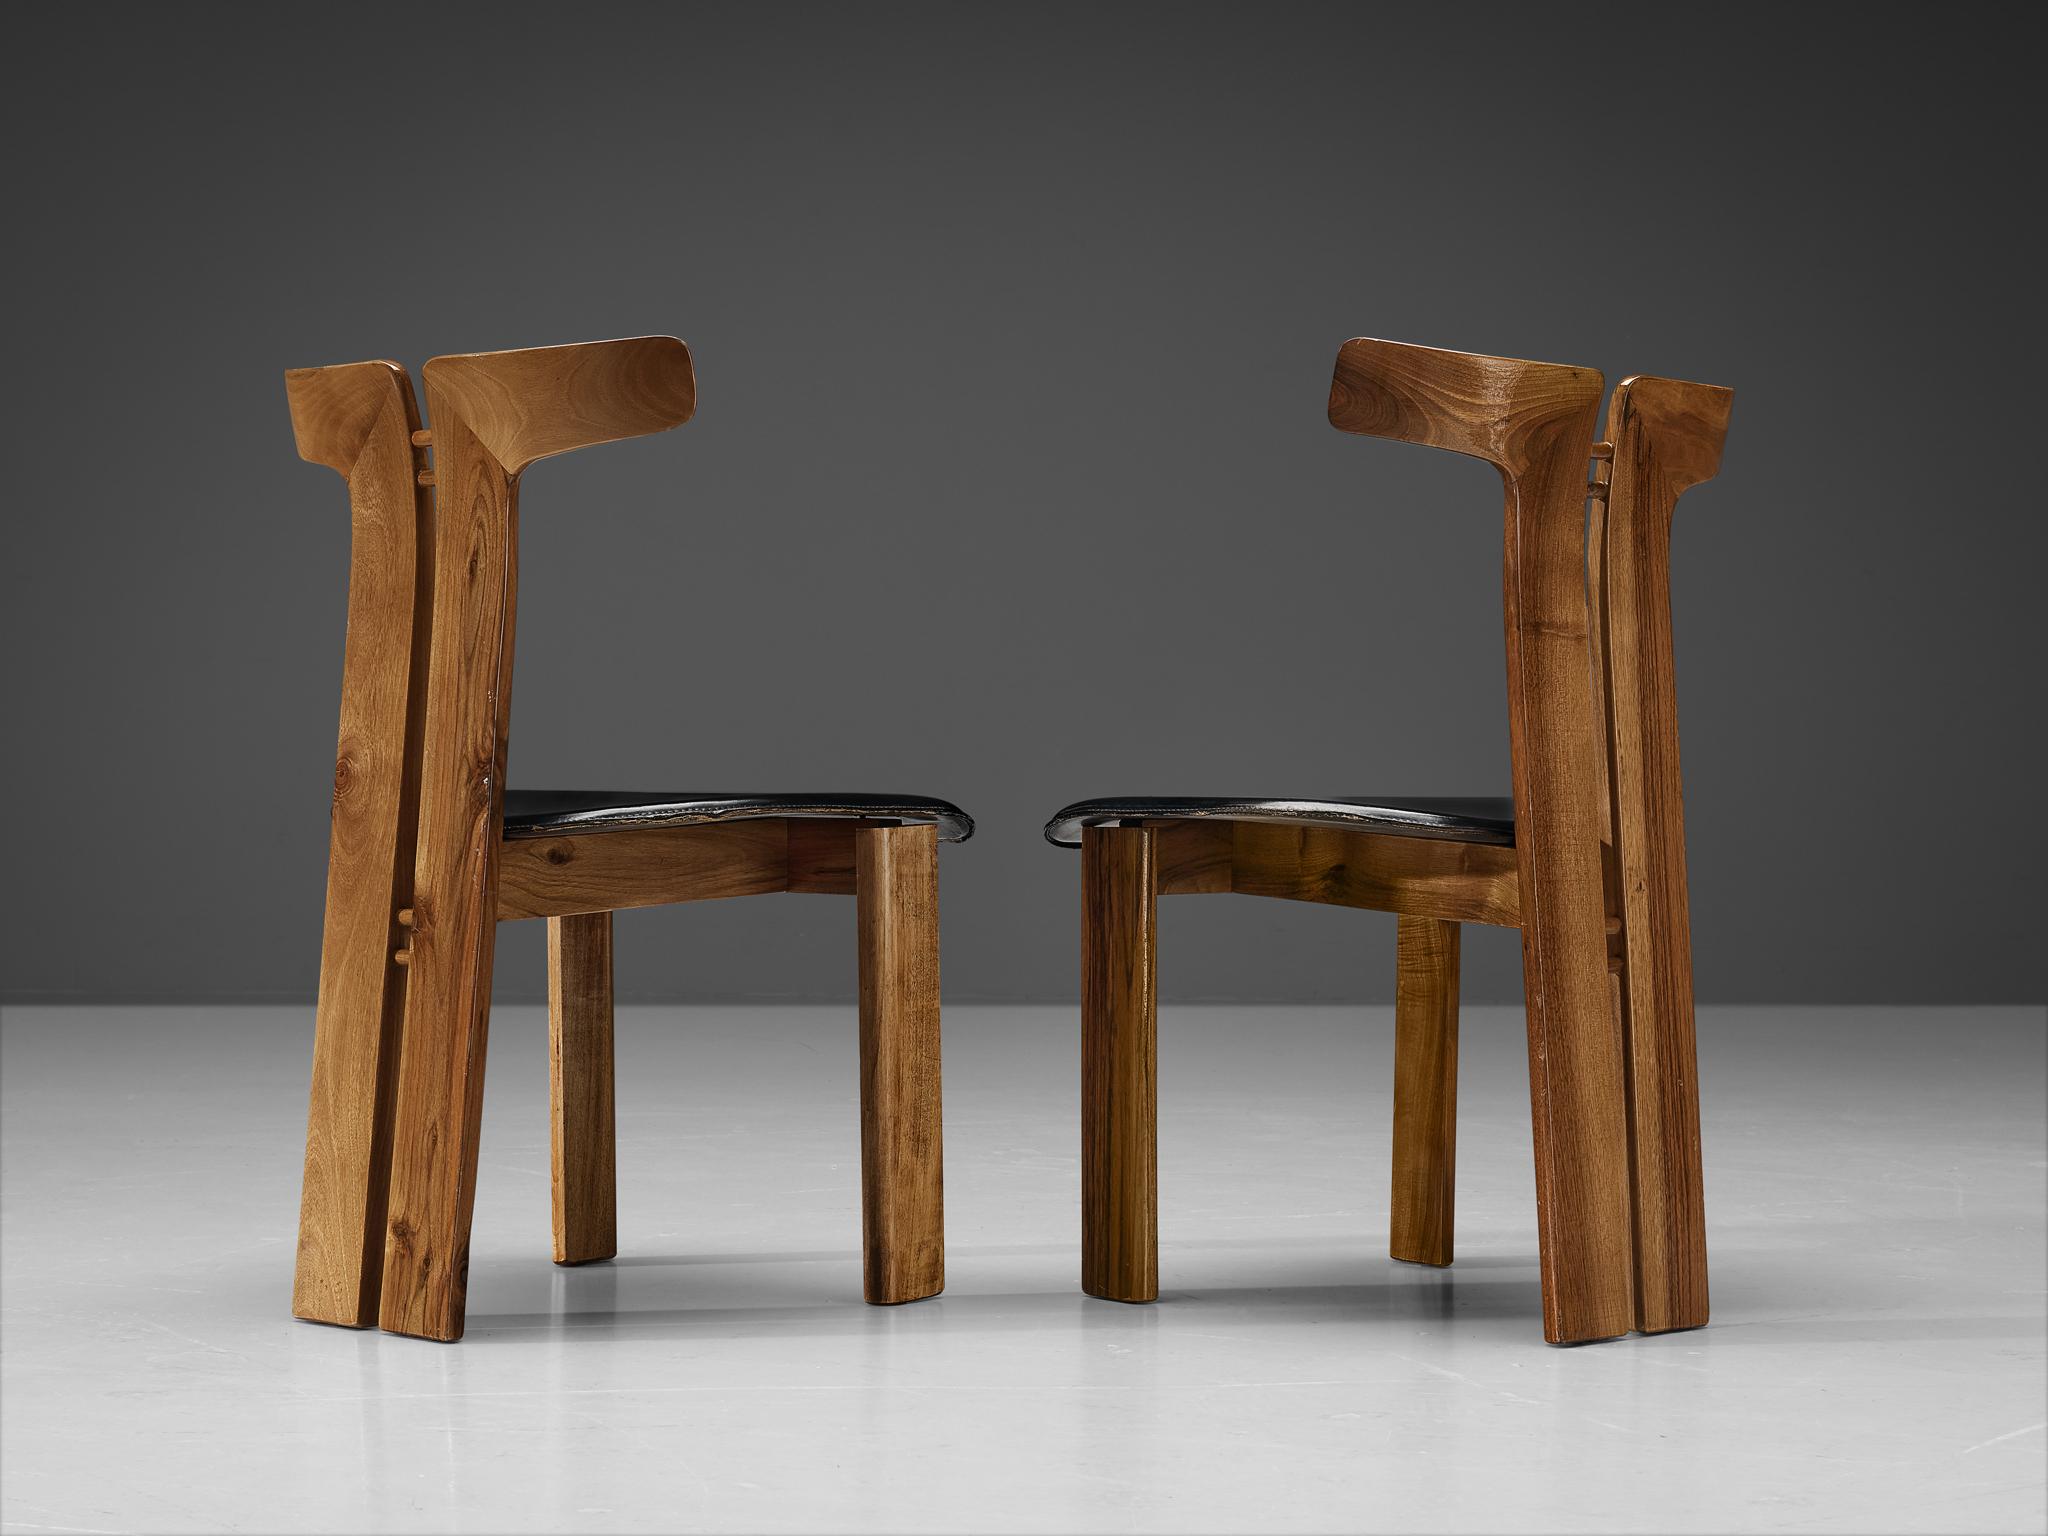 Pierre Cardin, pair of dining chairs, walnut, leather, Italy, circa 1980. 

This sculptural chair is designed by Italian designer Pierre Cardin (1922-2020). The curved back highlights the qualities of the wood and its shape in an unparalleled